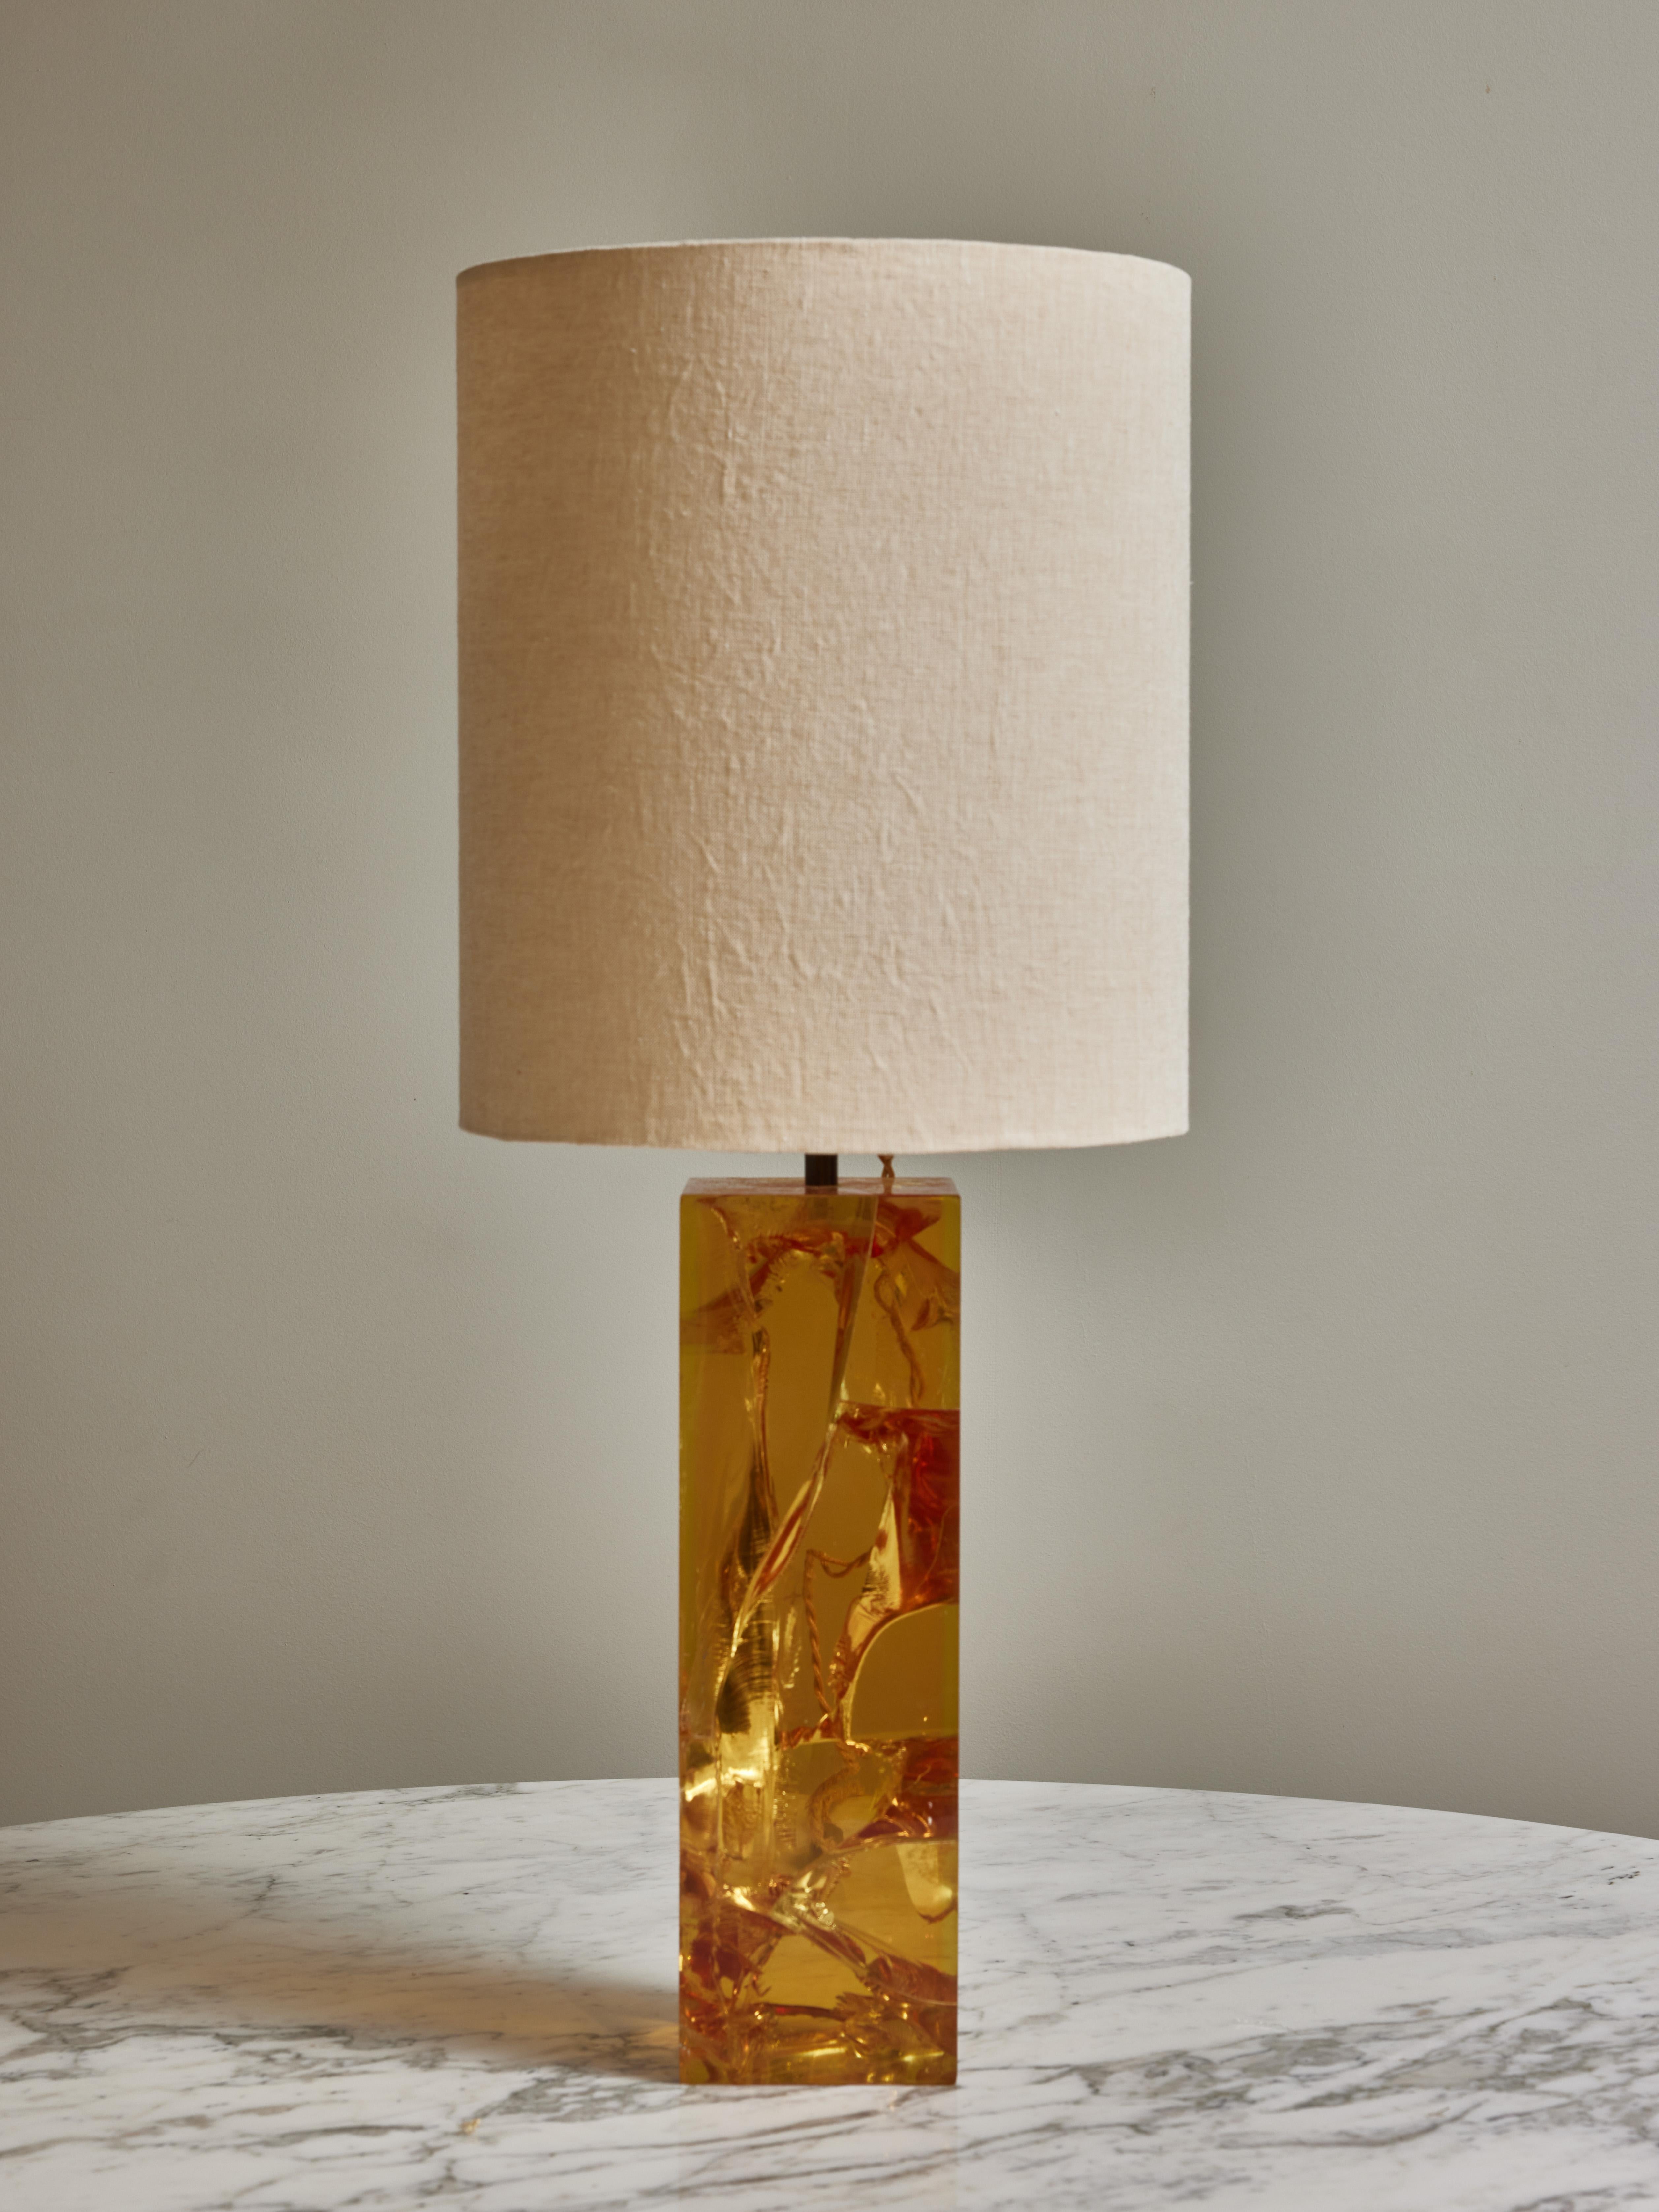 Rectangular table lamp made of a bloc of yellow fractal resin and brass hardware.
Topped with a modern shade.

FRANÇOIS GODEBSKI (1940-1997) François Godebski was a Franch designer and sculptor who came from a family of artists, his father was a